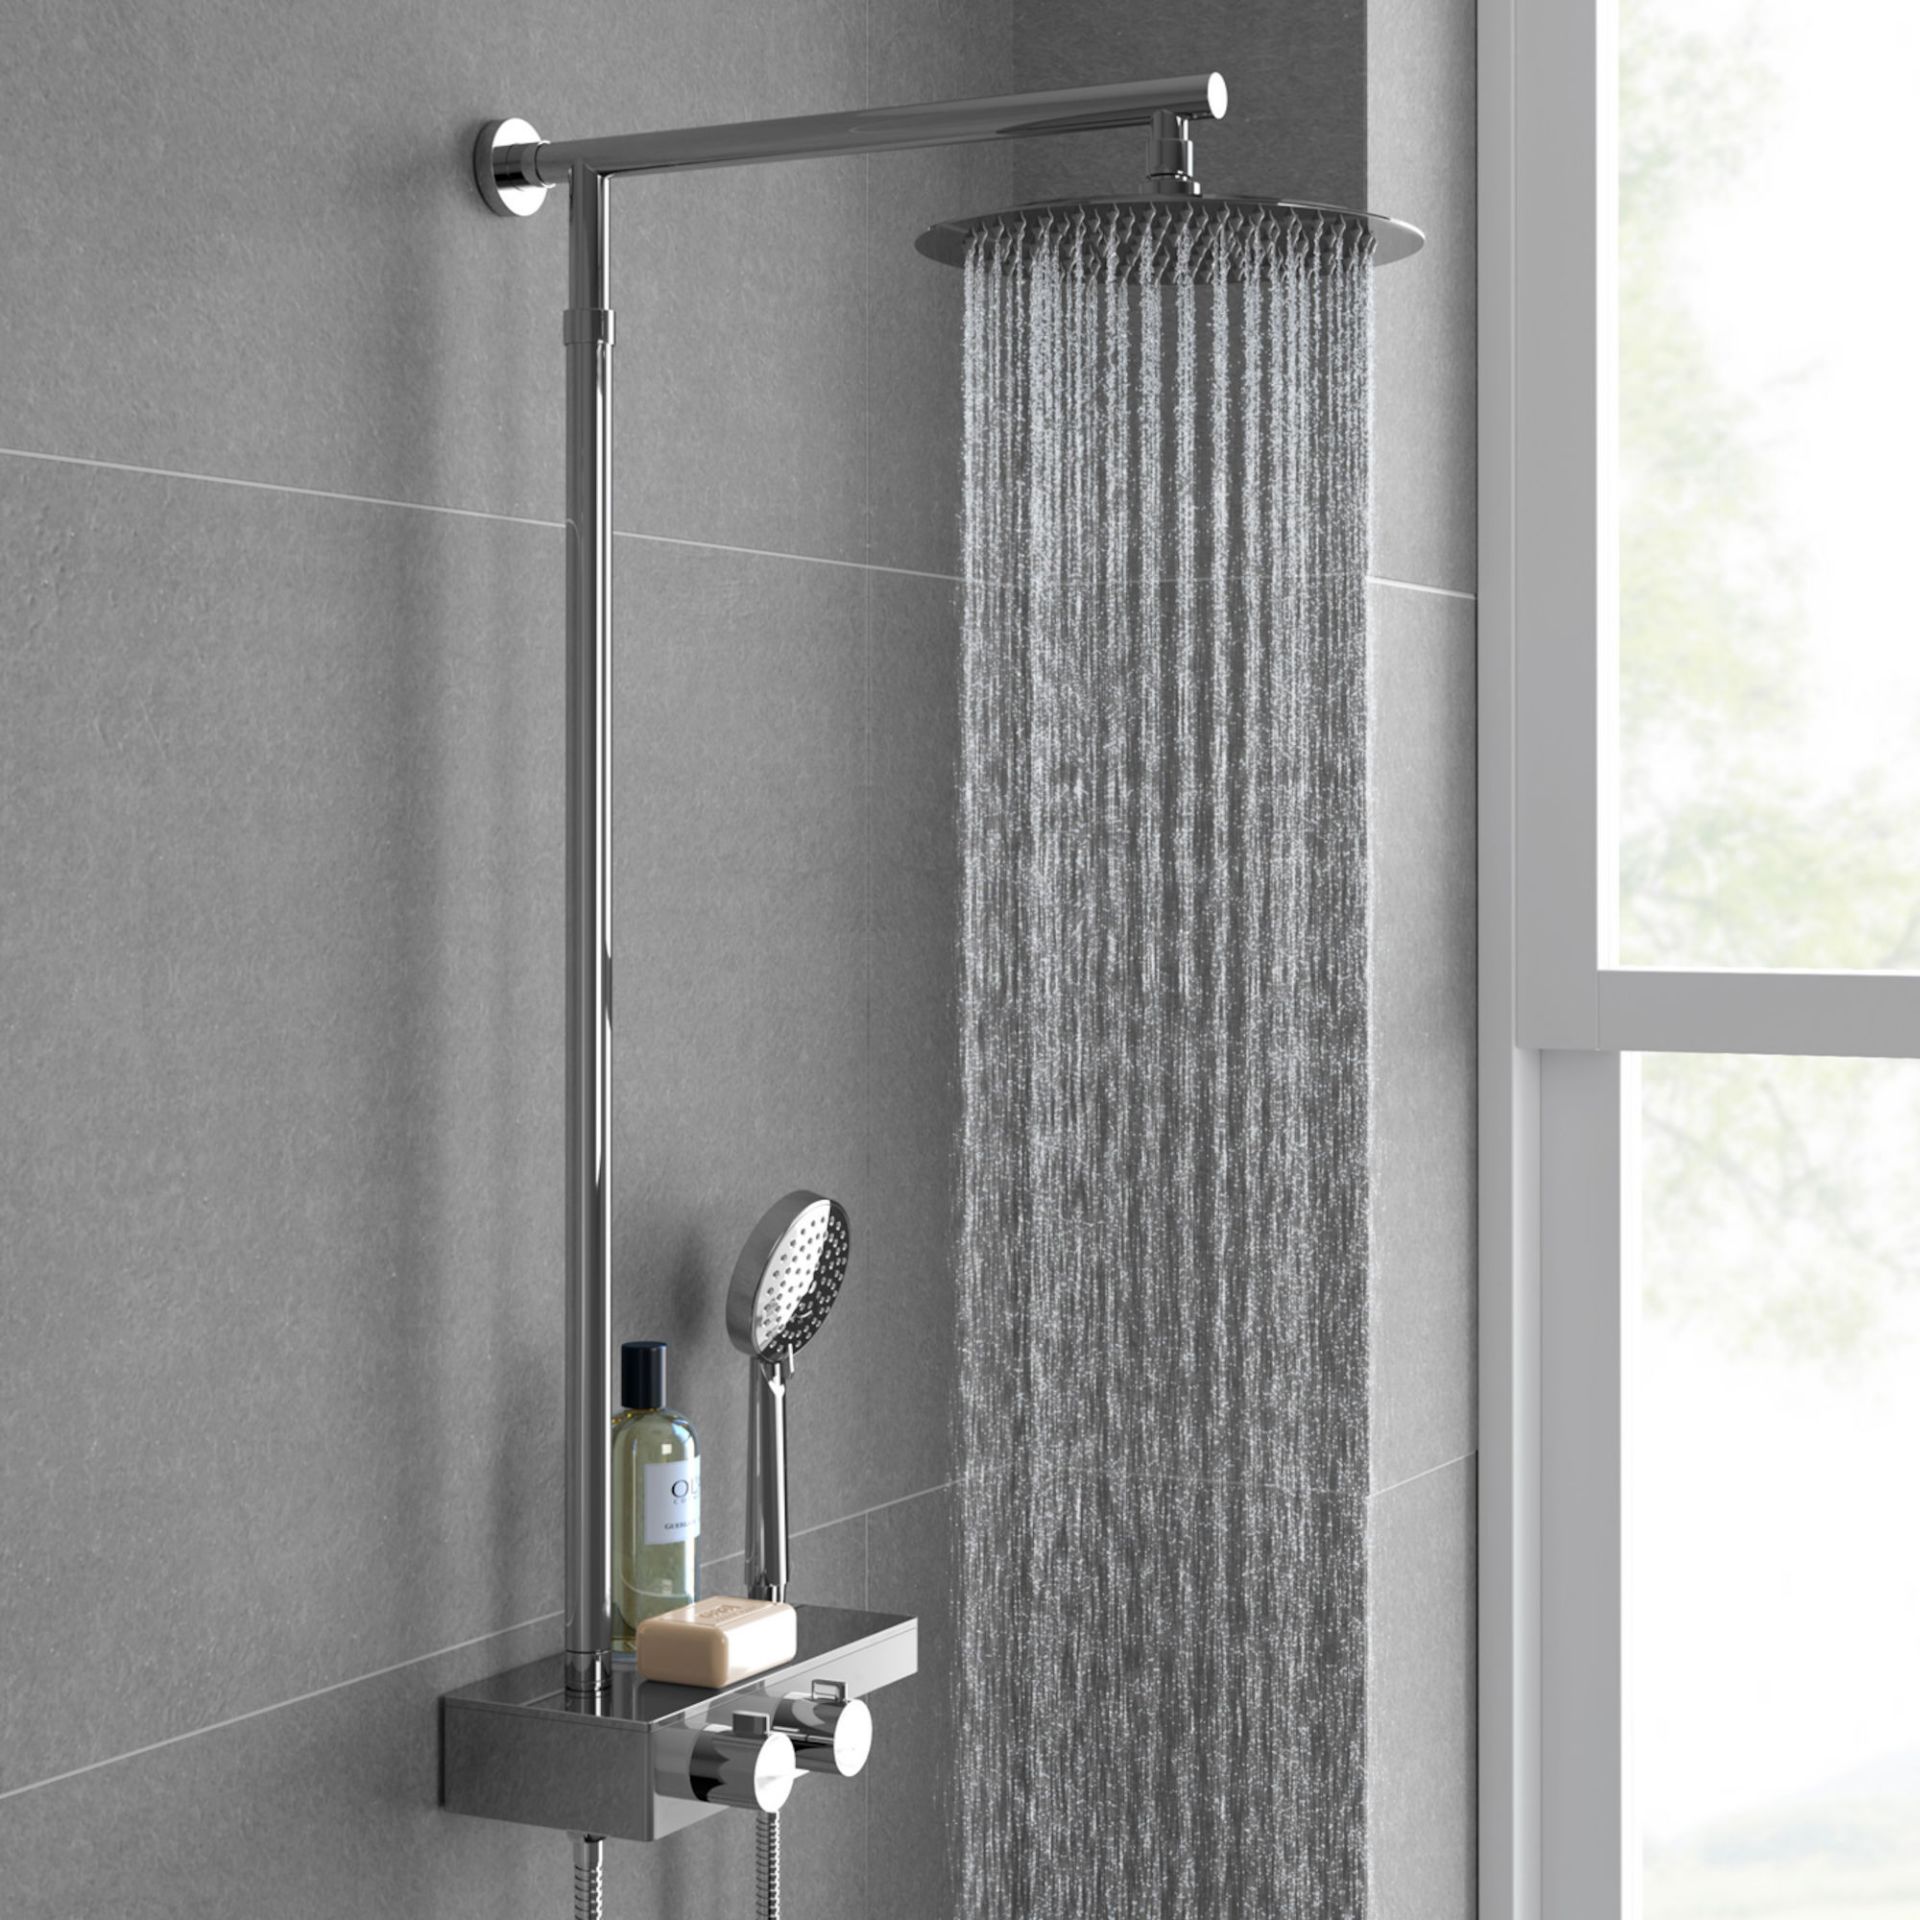 (AA103) Round Exposed Thermostatic Mixer Shower Kit & Large Head. RRP £349.99. Cool to touch s...